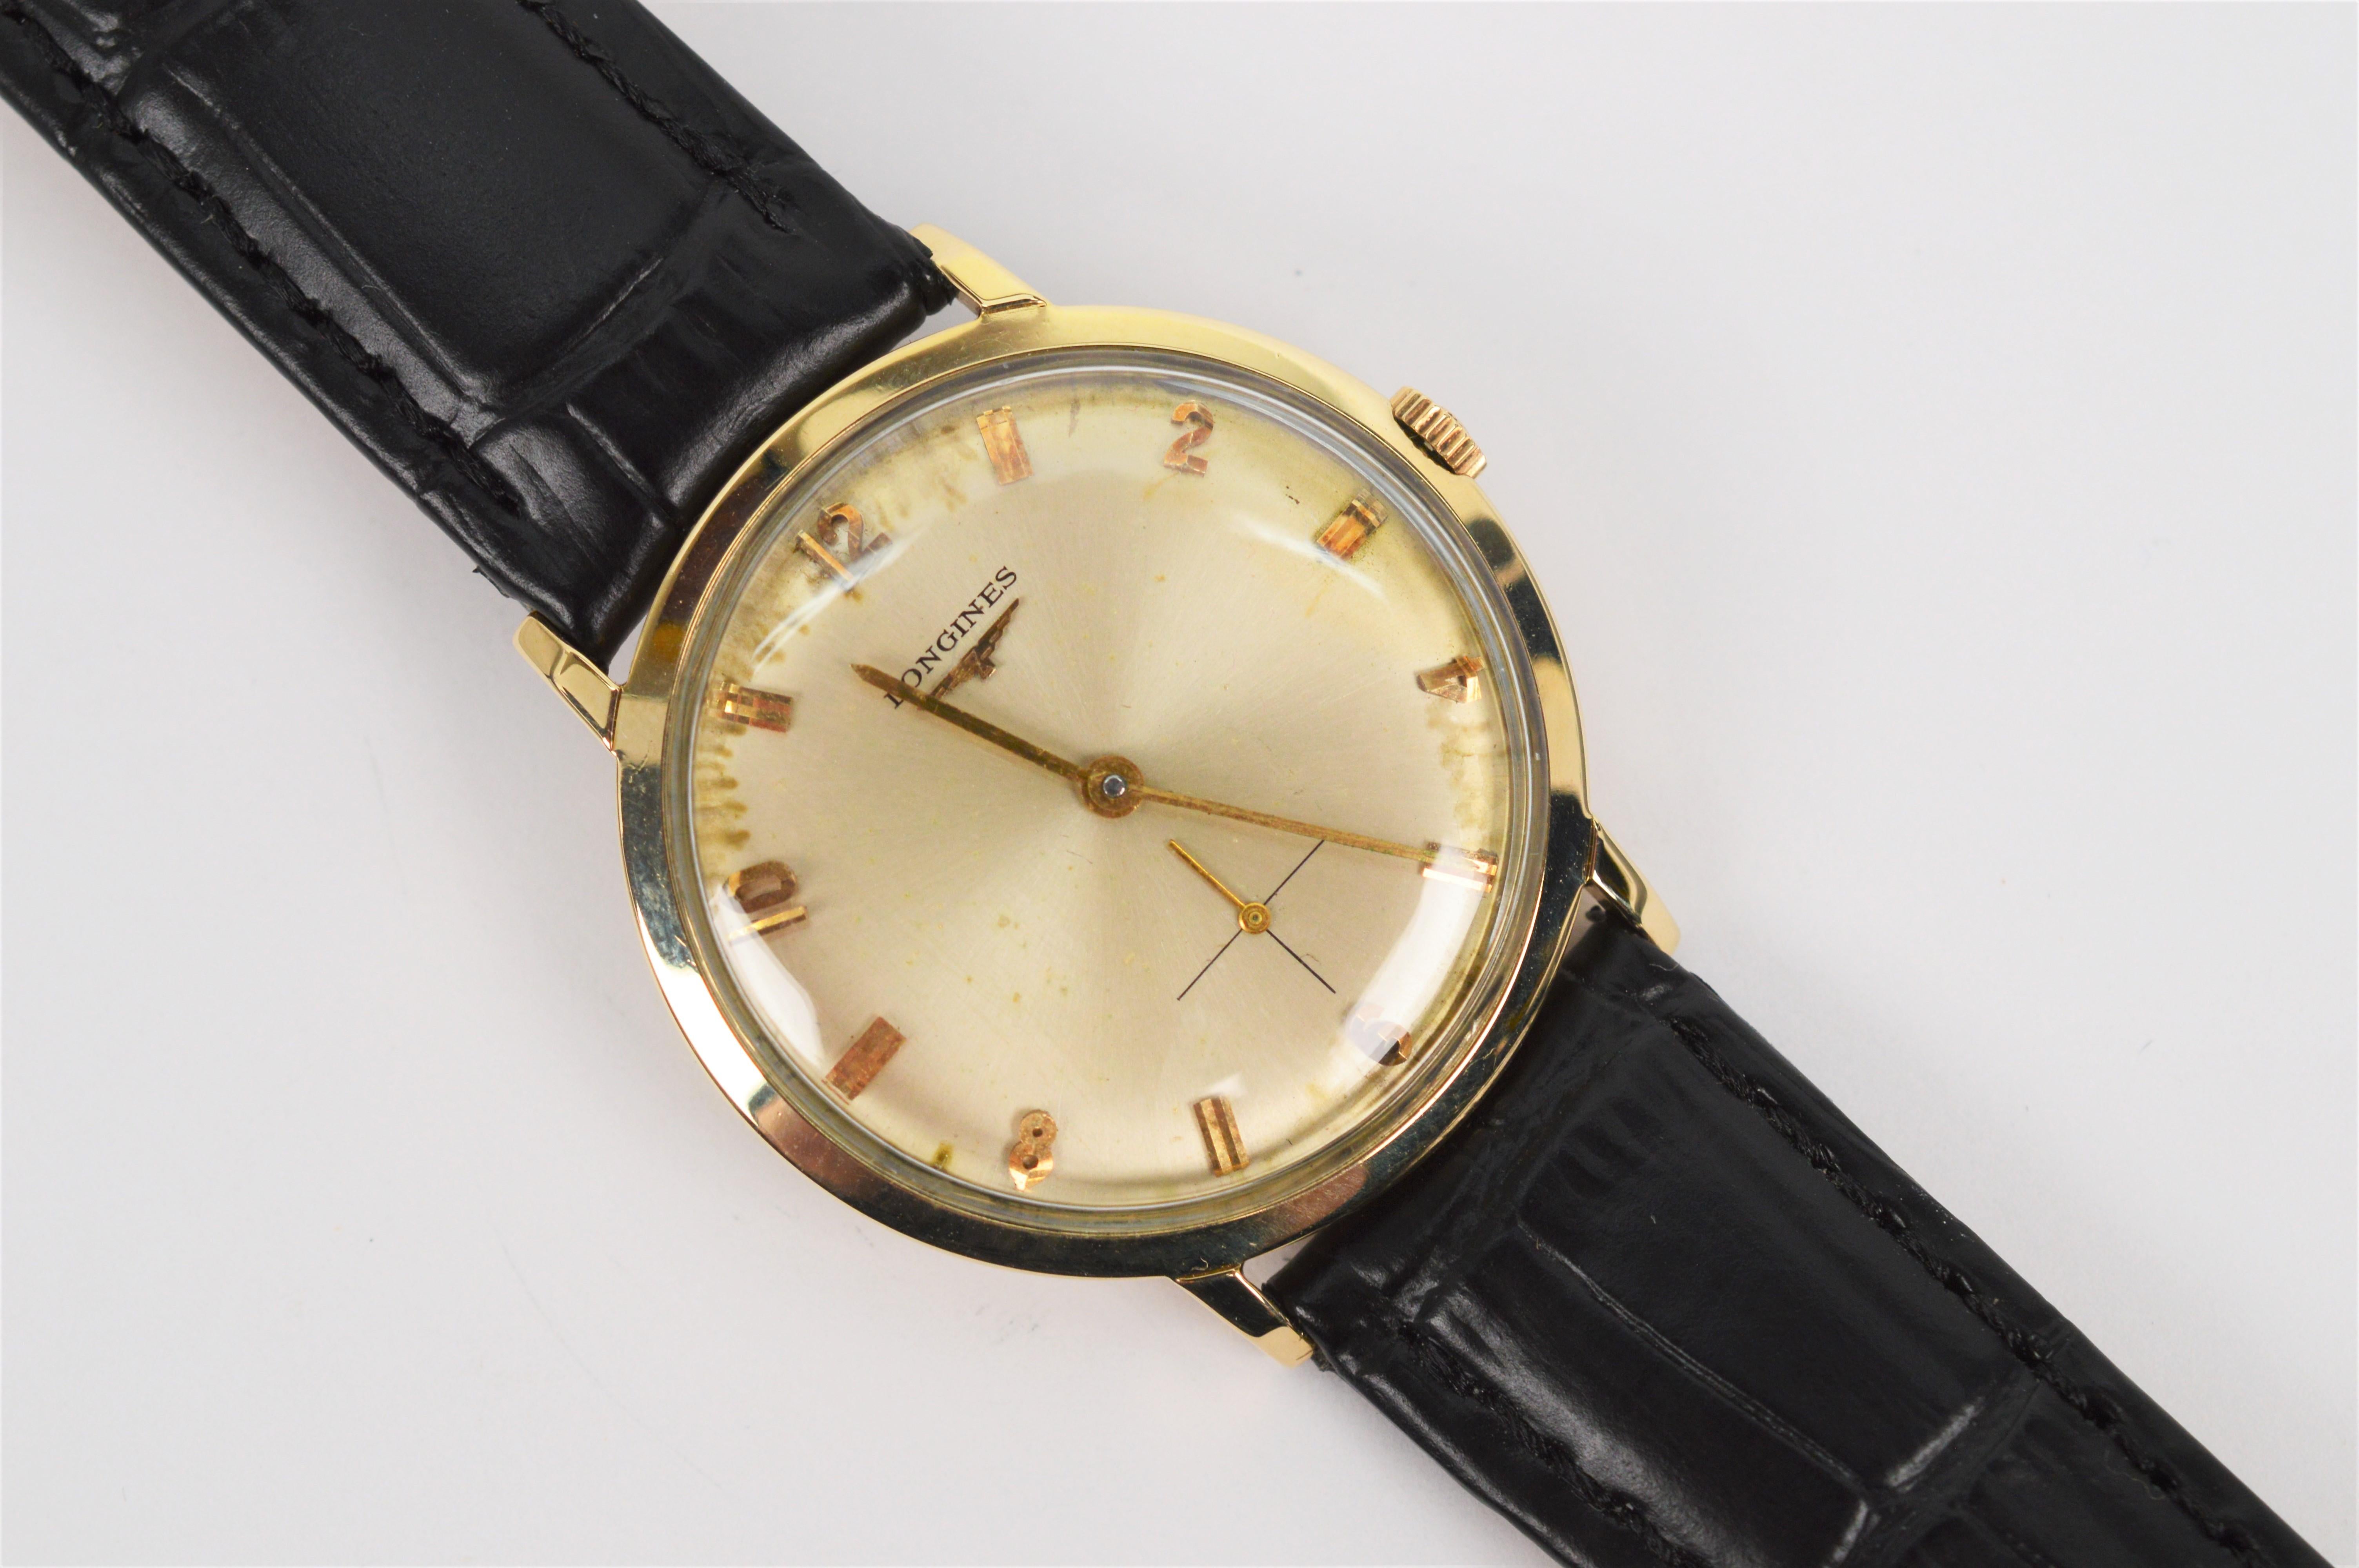 Longines 14 Karat White Gold Men's Classic Dress Watch Model 370 In Good Condition For Sale In Mount Kisco, NY